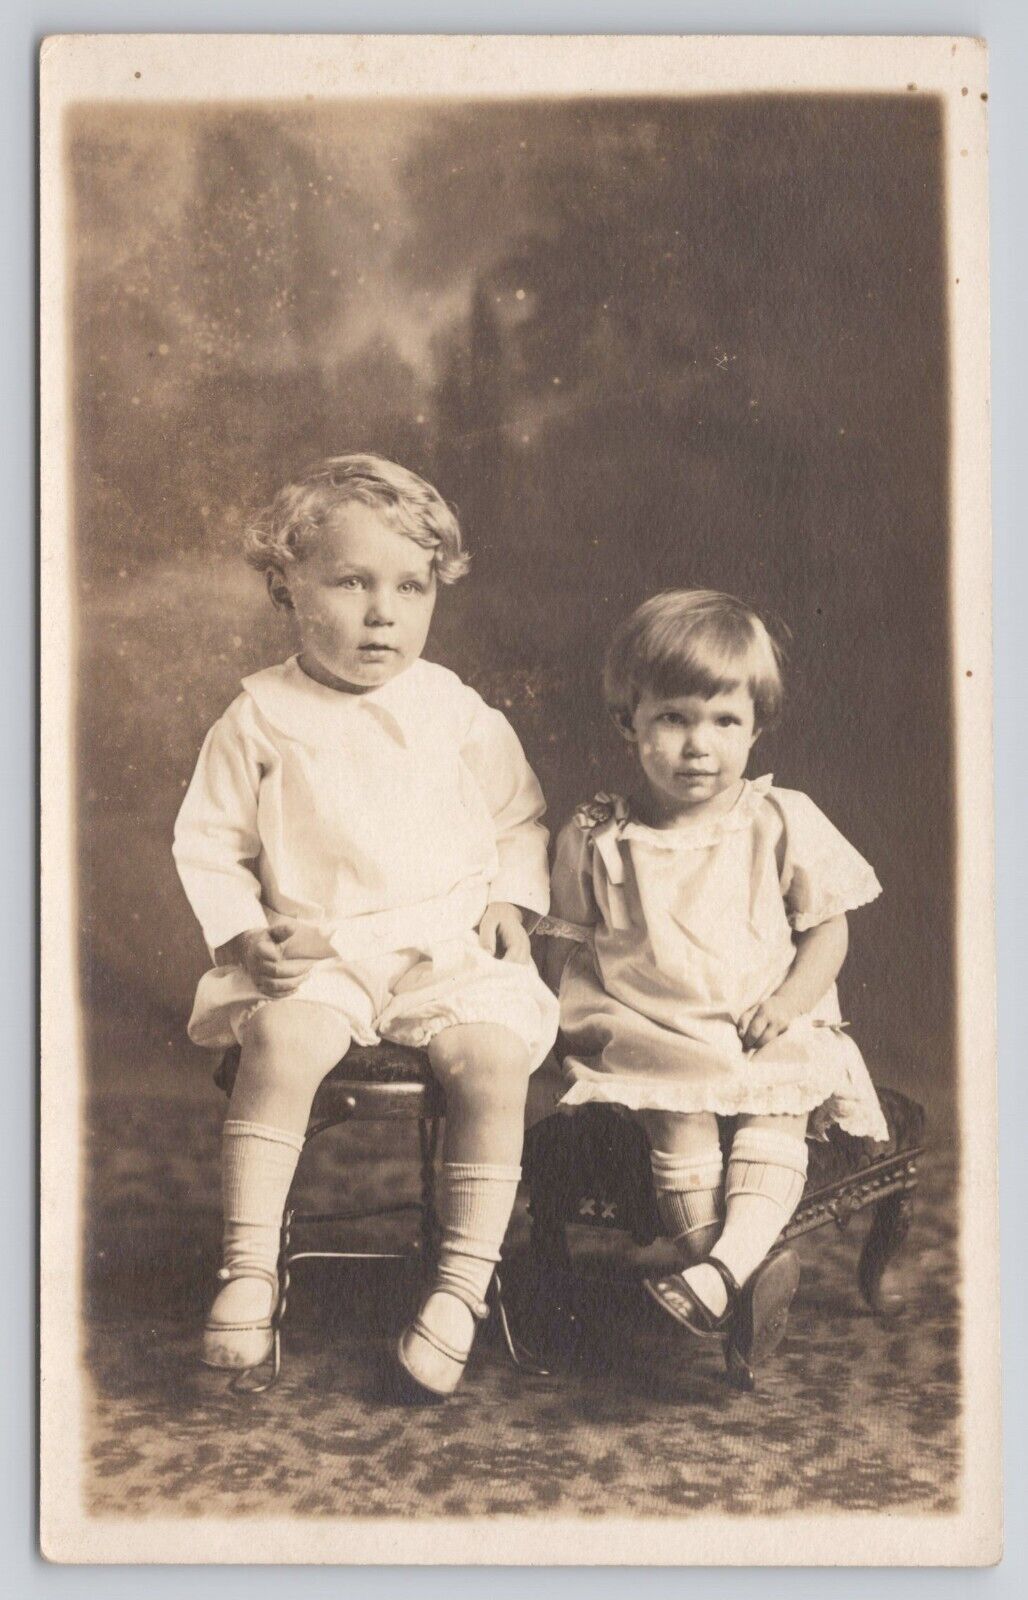 RPPC of Young Children Marked Anna May and Cousin AZO c1929-1940 Photo Postcard